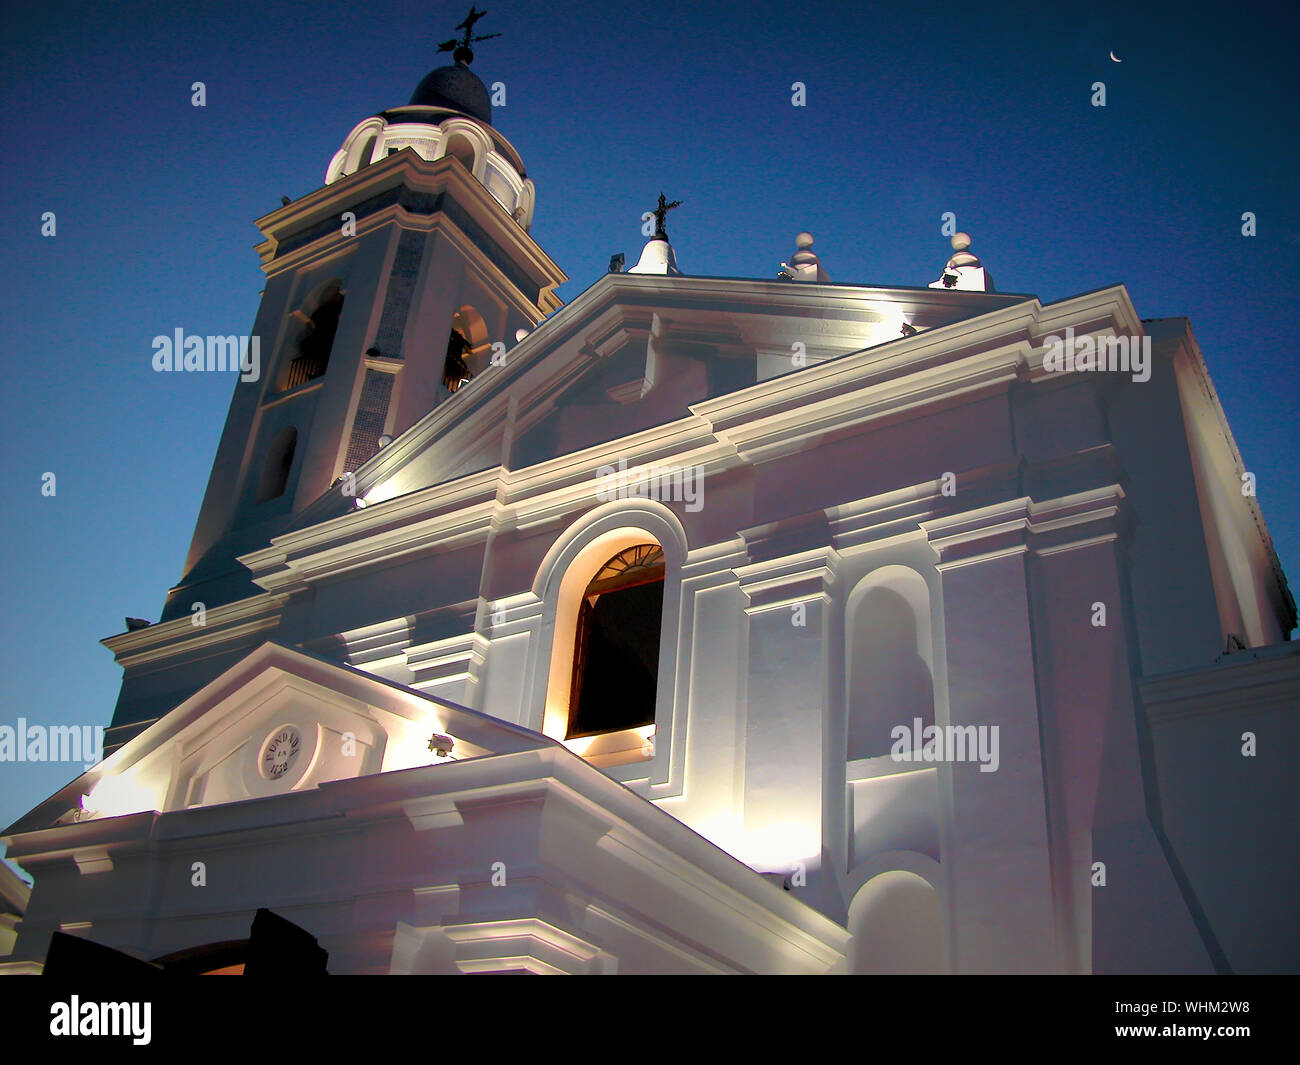 A view of the front facade of Basilica of Our Lady of the Pillar at twilight. The church is in Recoleta, Buenos Aires, Argentina Stock Photo